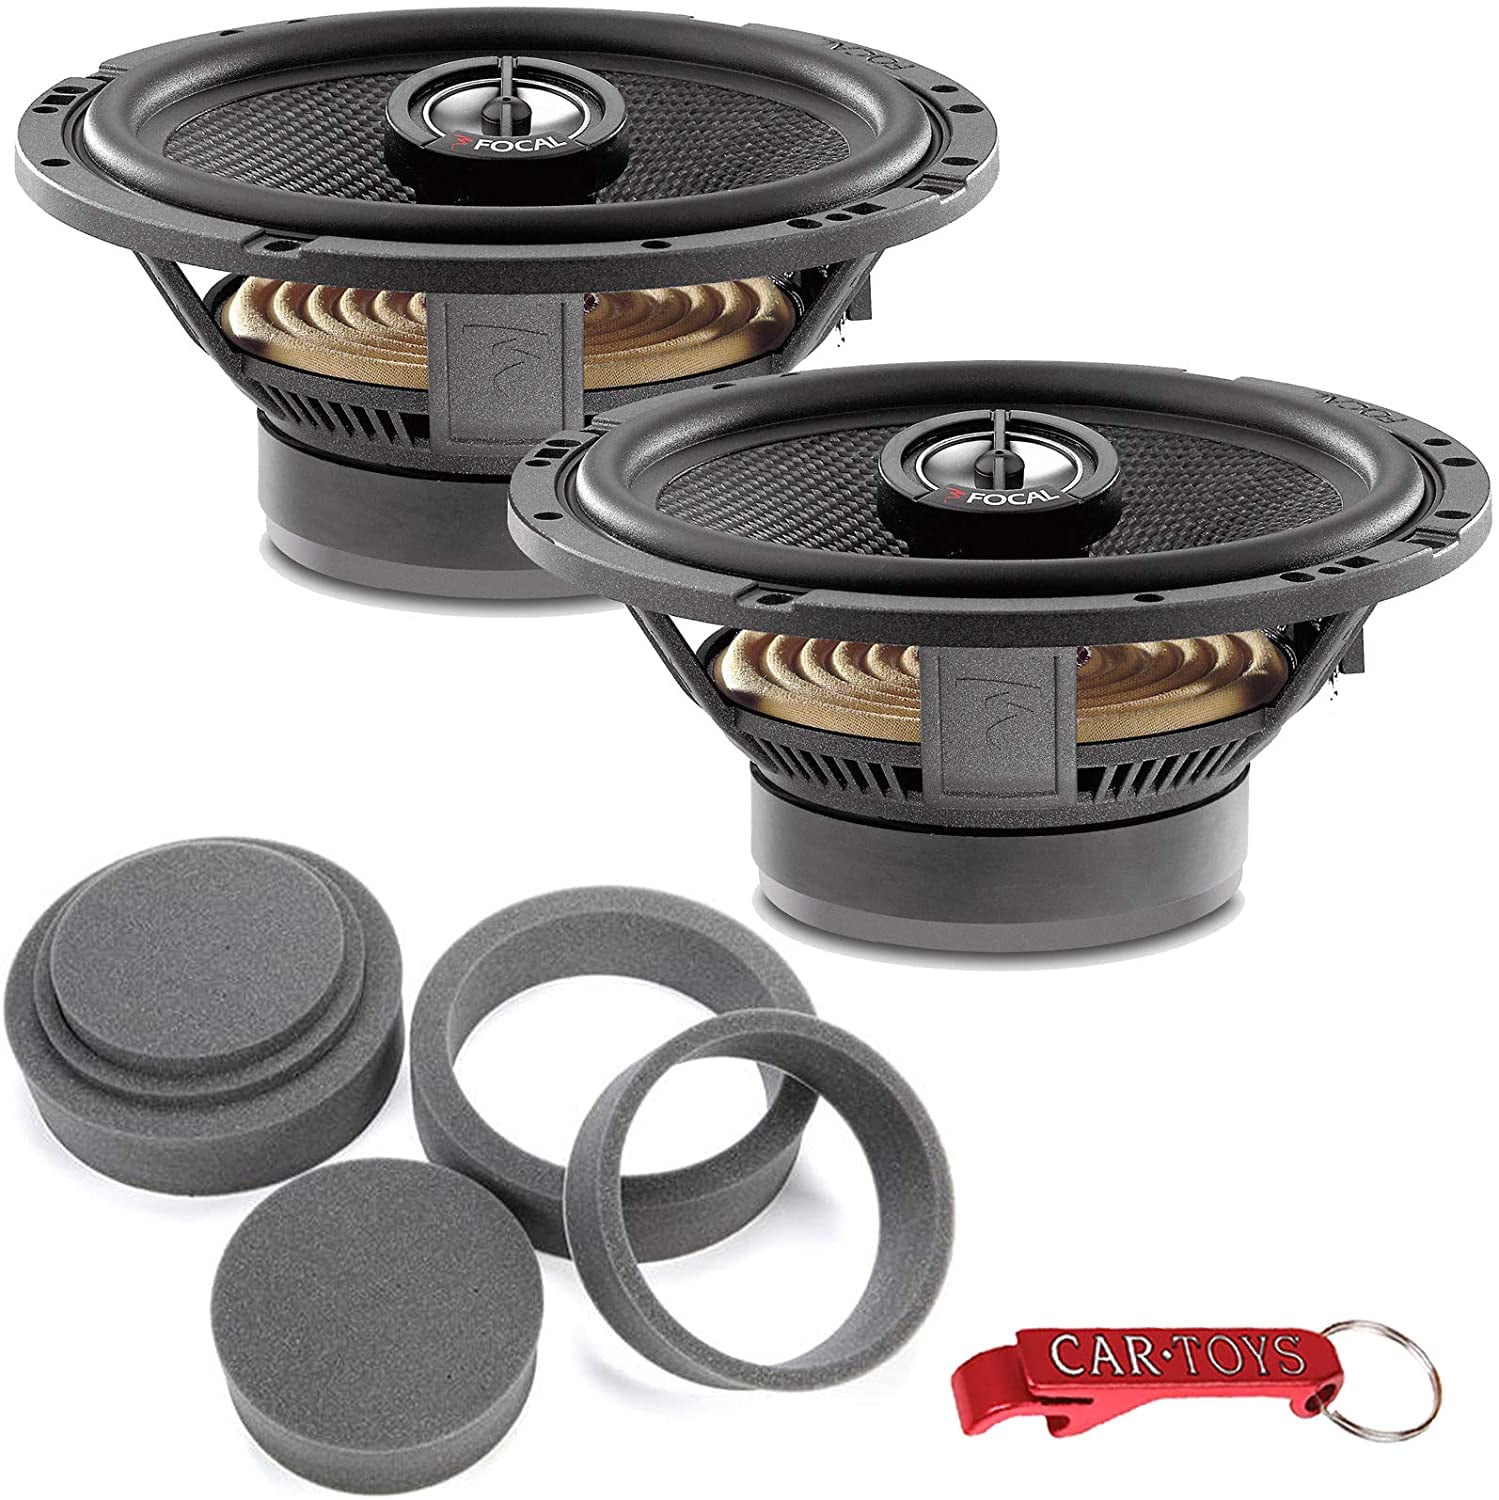 Fabel Bacteriën Goodwill Focal 165CA1 SG 2-Way 6.5-inch Coaxial Car Speakers Bundle with Fast Rings  3-Pc Audio Enhancement Kit. Rings Increase Mid-Bass, Reduce Vibration and  Rear Reflection for Low Distortion - Walmart.com